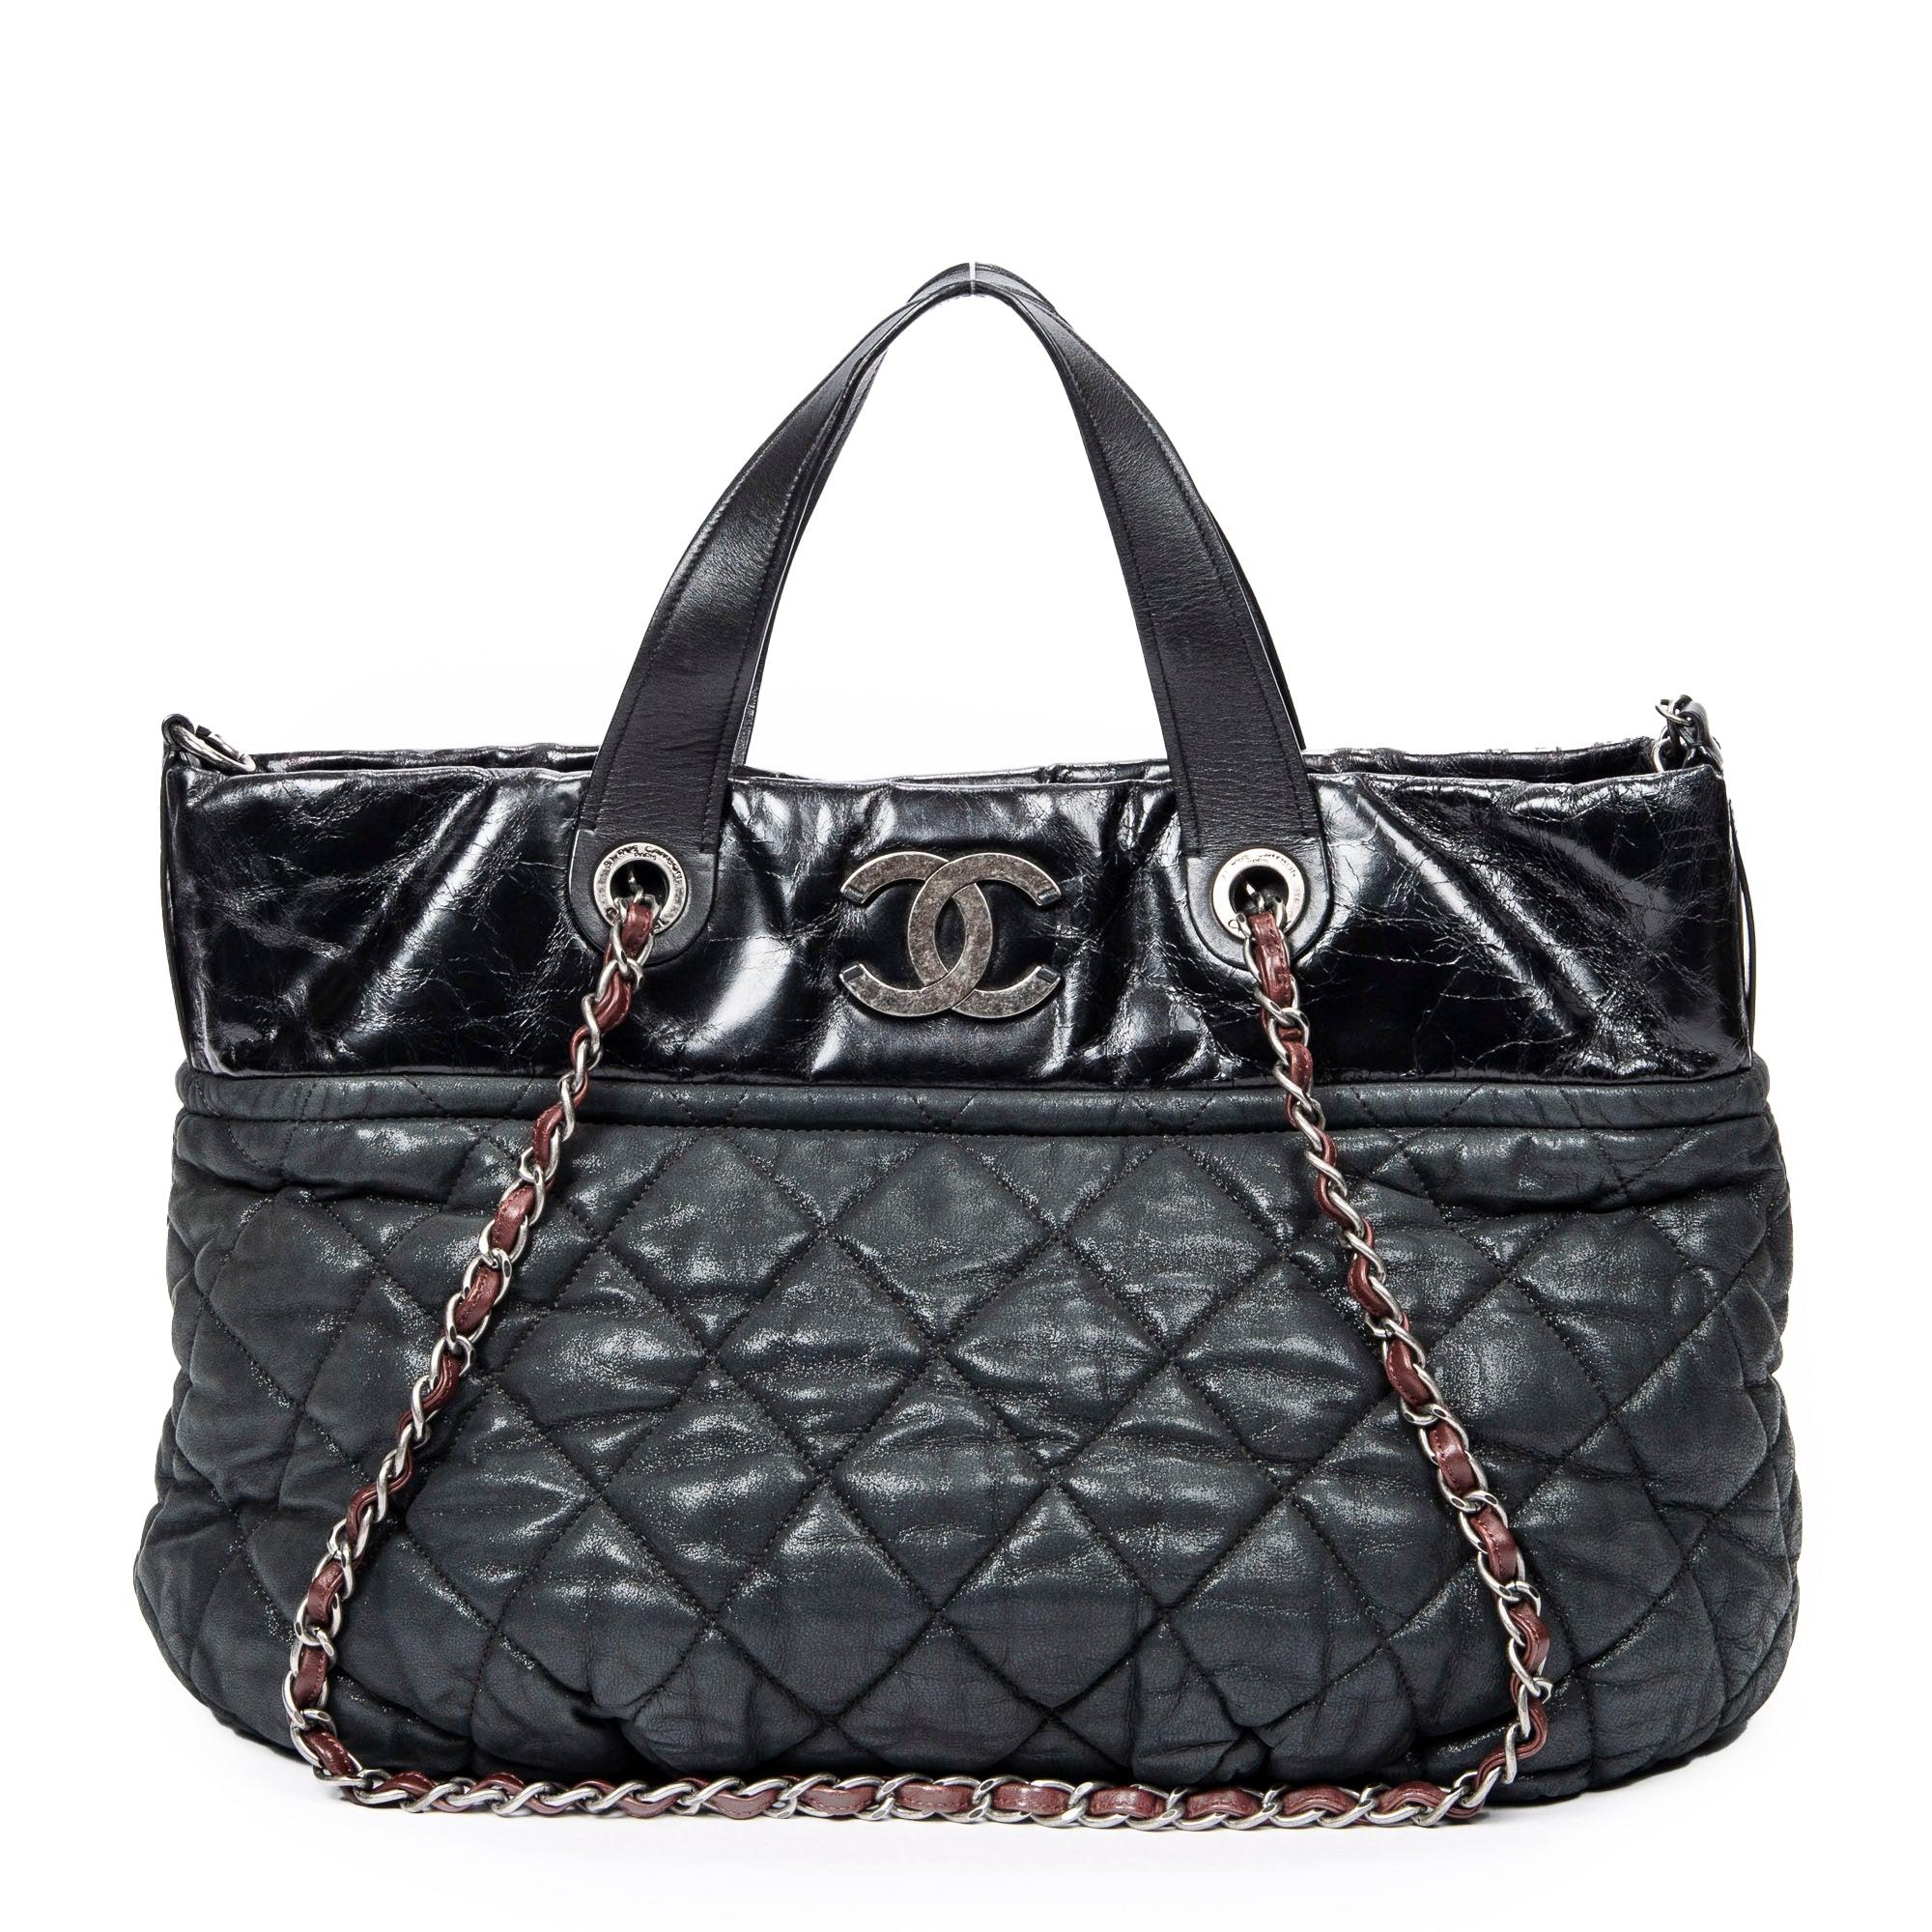 Chanel pre-owned cc classic - Gem